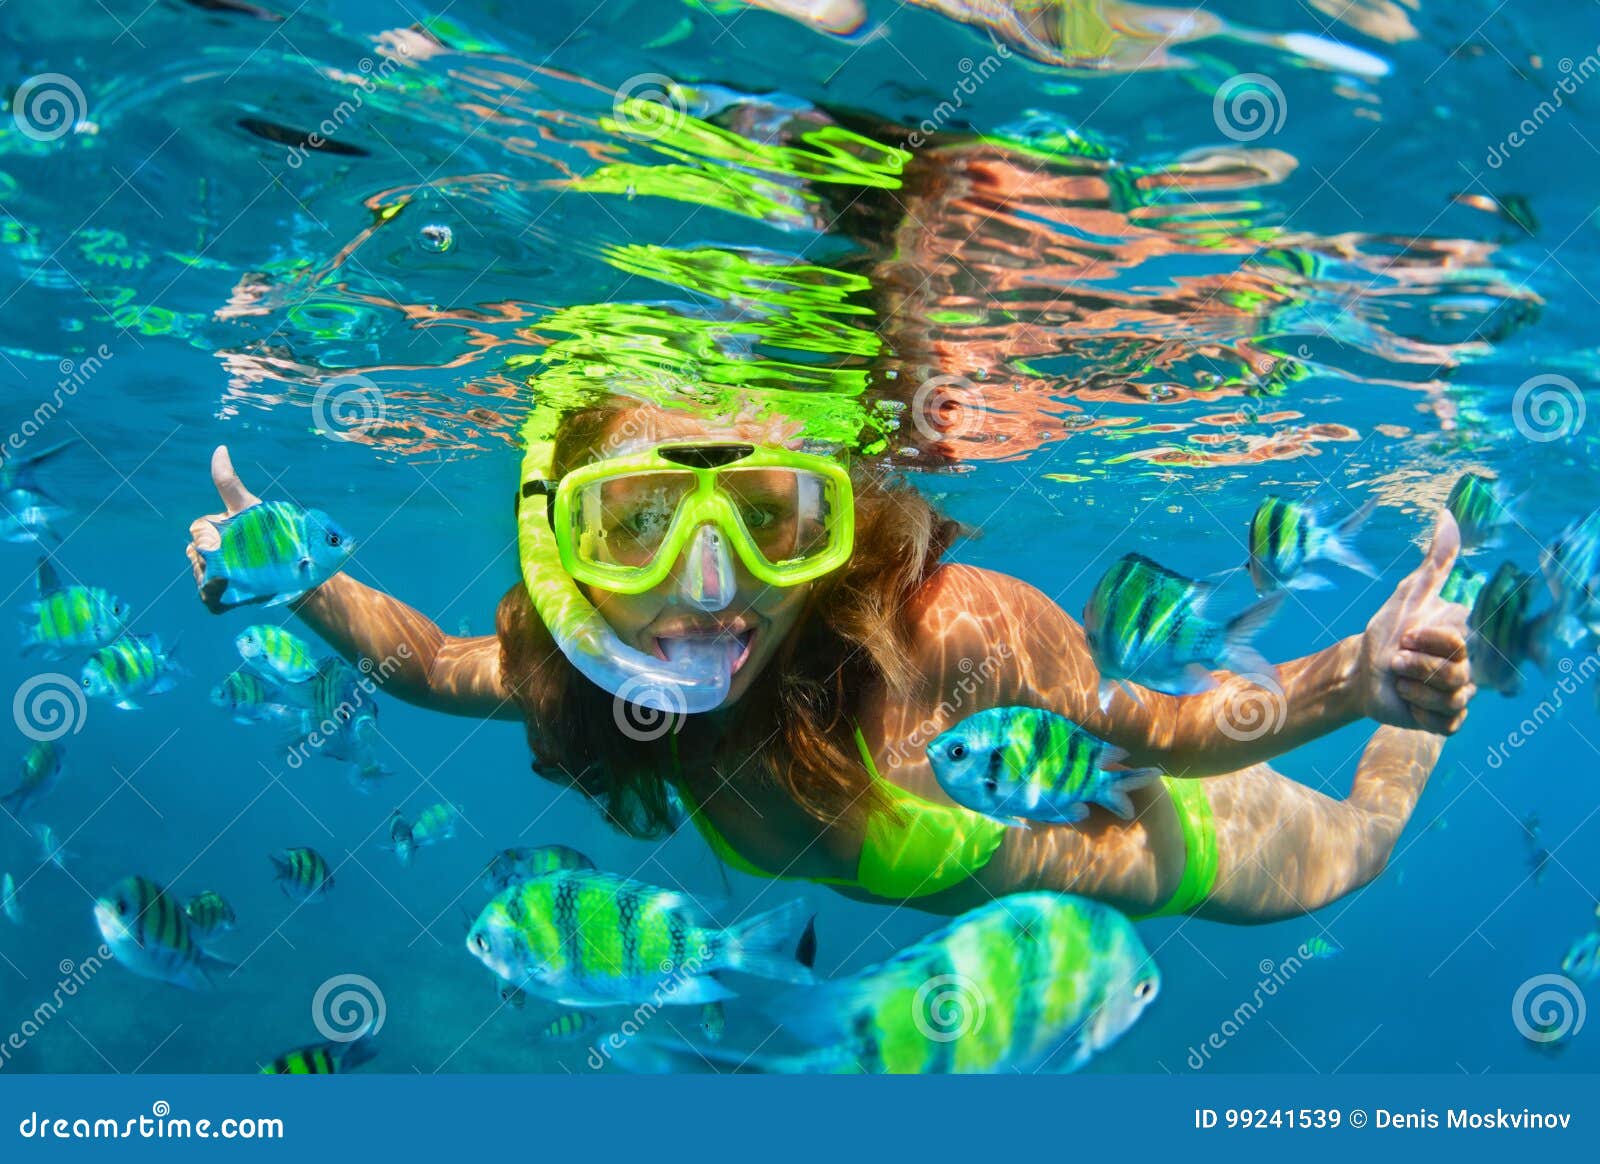 girl in snorkeling mask dive underwater with coral reef fishes